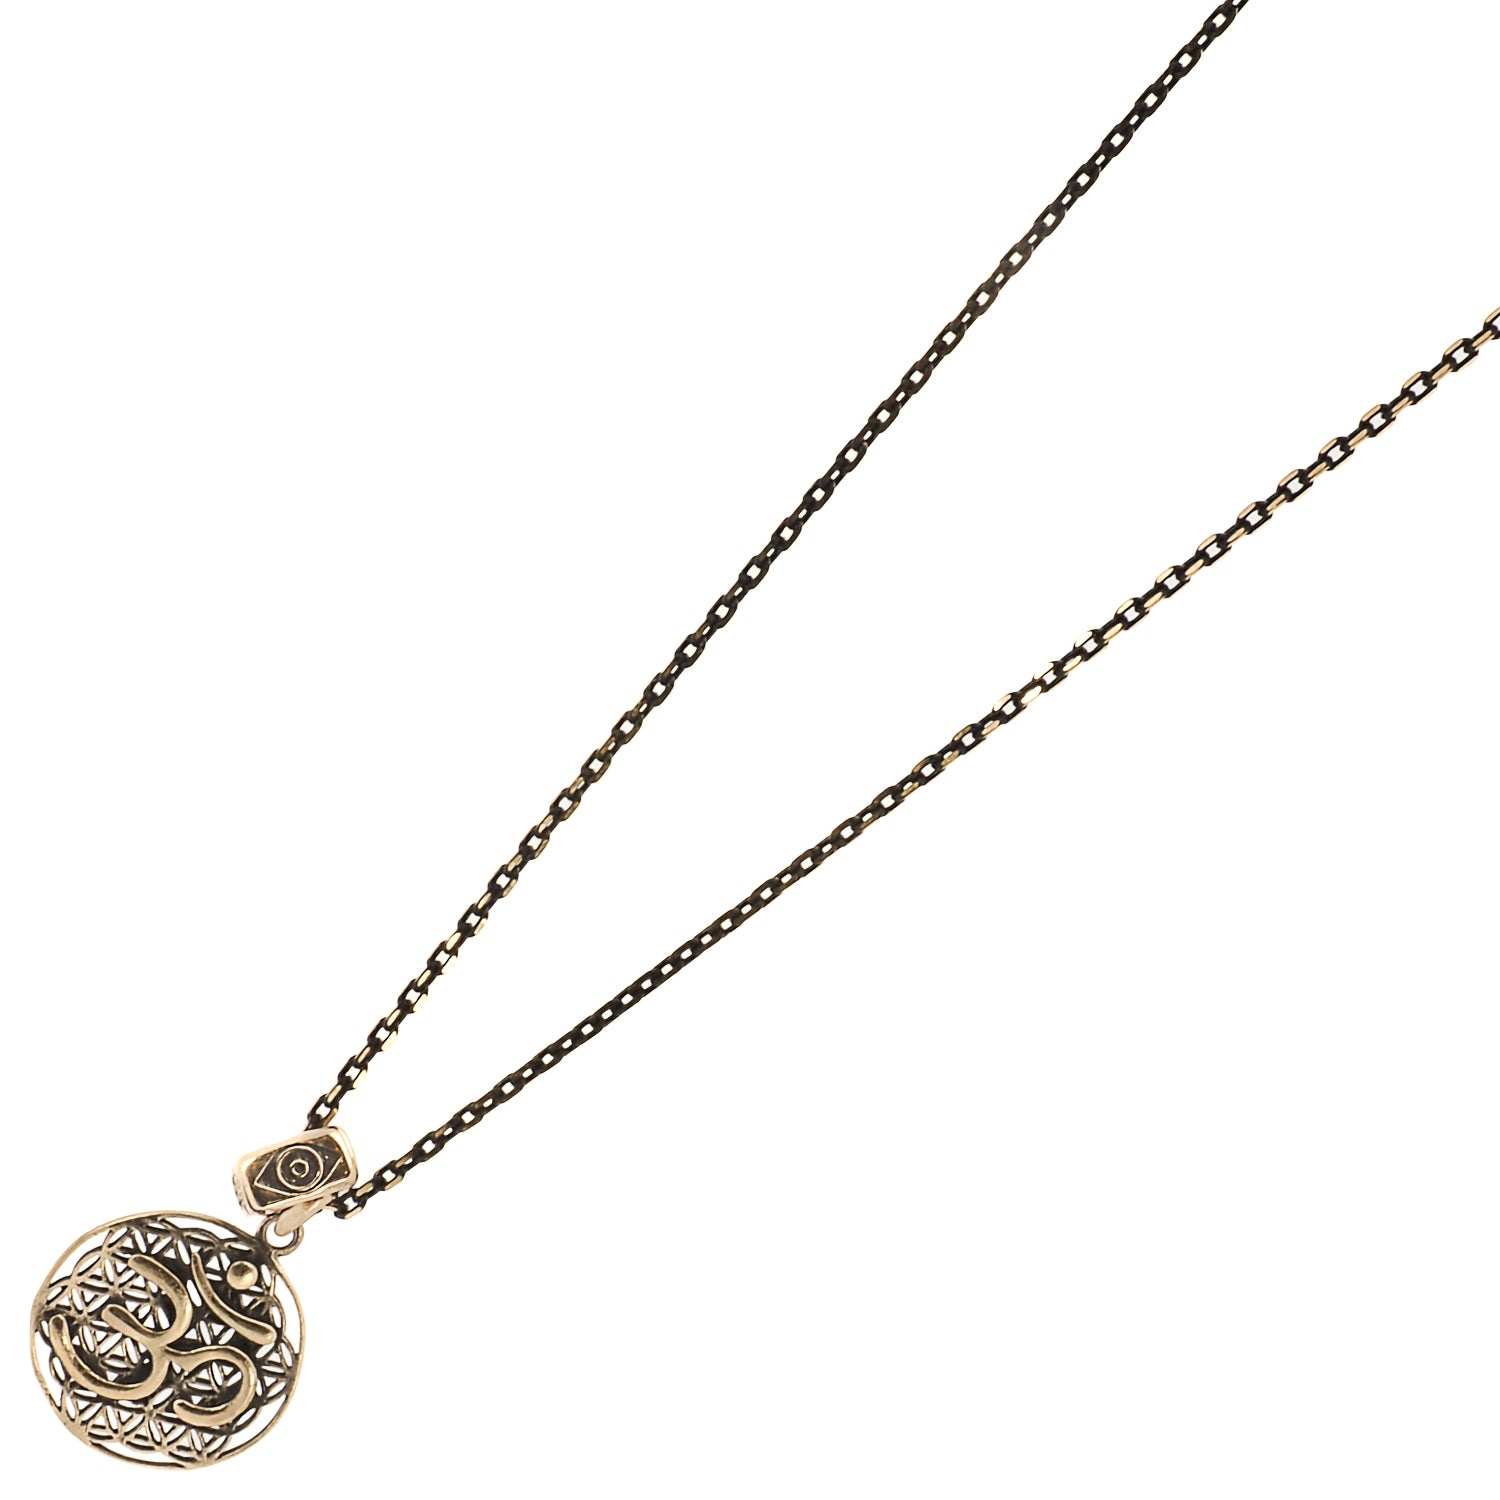 The Spiritual Symbols Om Necklace, a meaningful piece of handmade jewelry that combines spiritual symbols of protection, good luck, and wisdom.